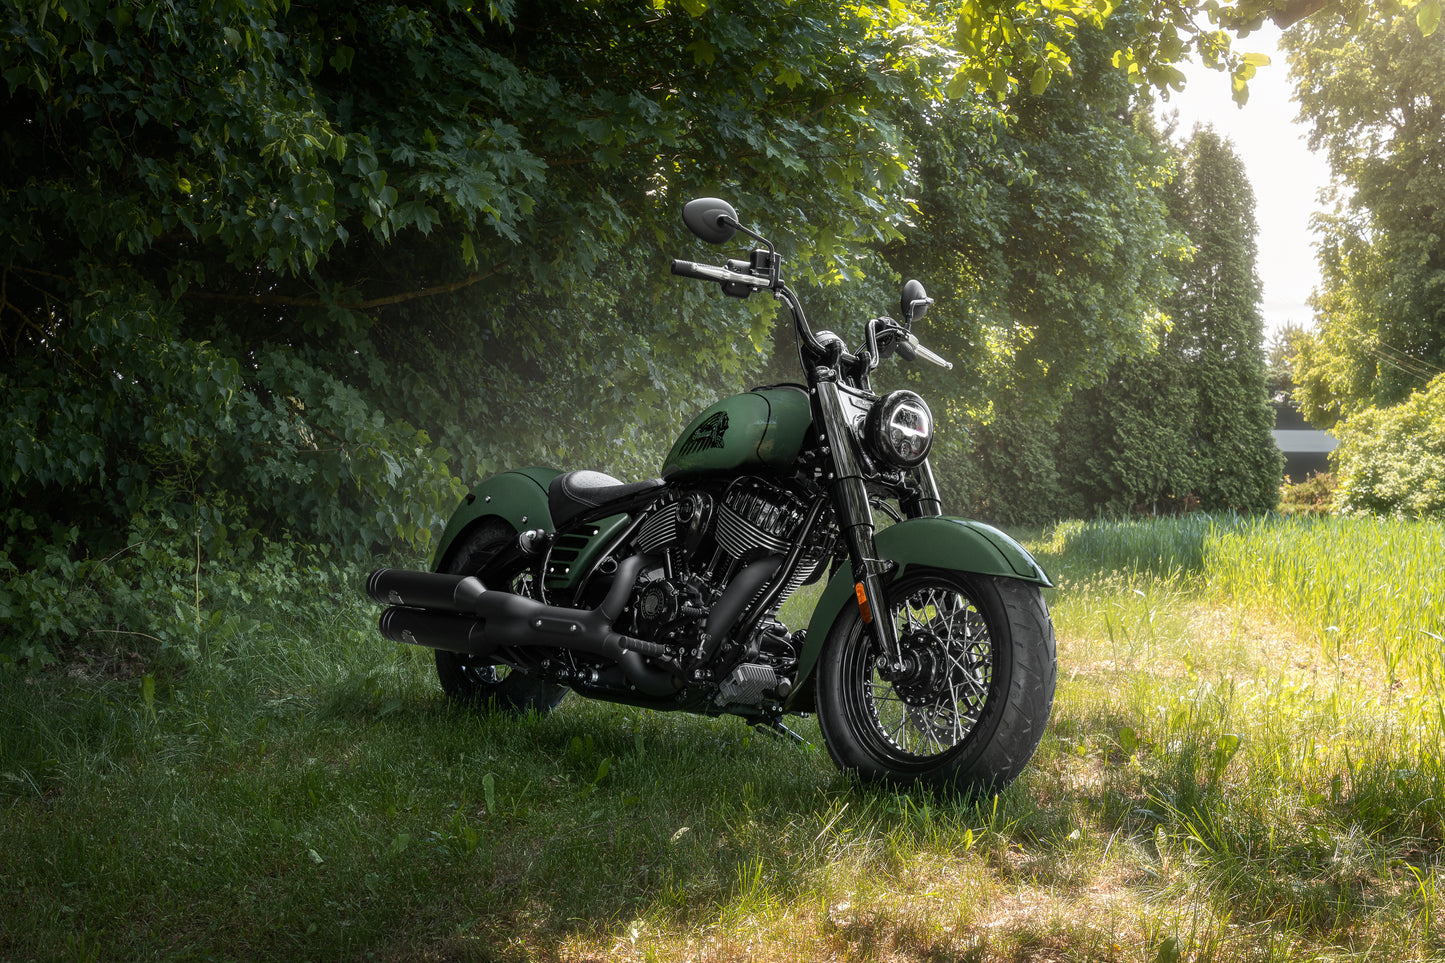 Harley Davidson motorcycle with Killer Custom "Apache" front fender from the side in the forest on a sunny day